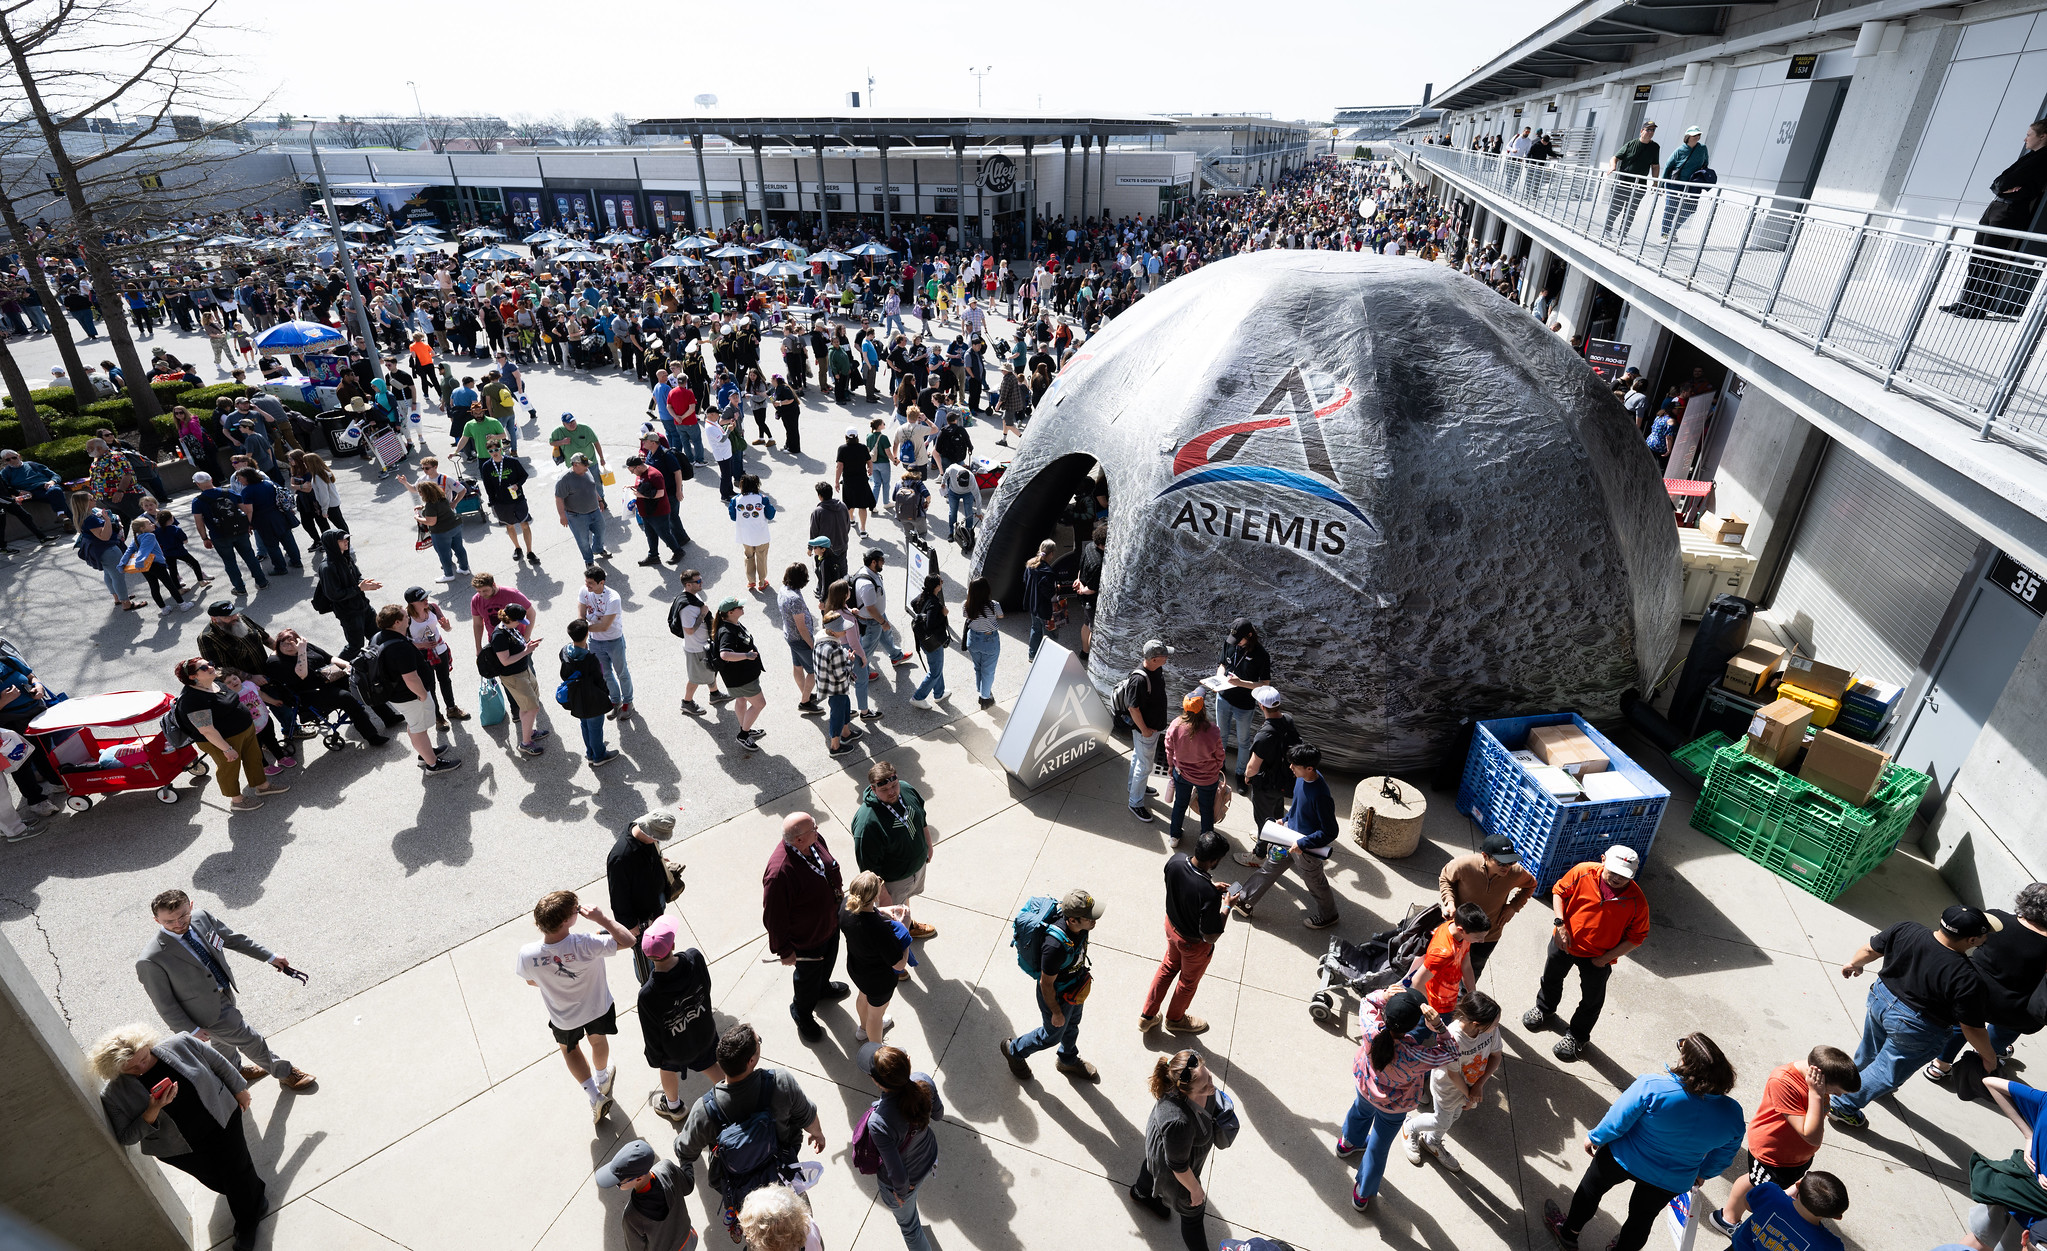 A view from above of a gray, large dome tent with images of the Moon. The tent has the Artemis insignia on it. Crowds of many people stand around the outside of the tent.